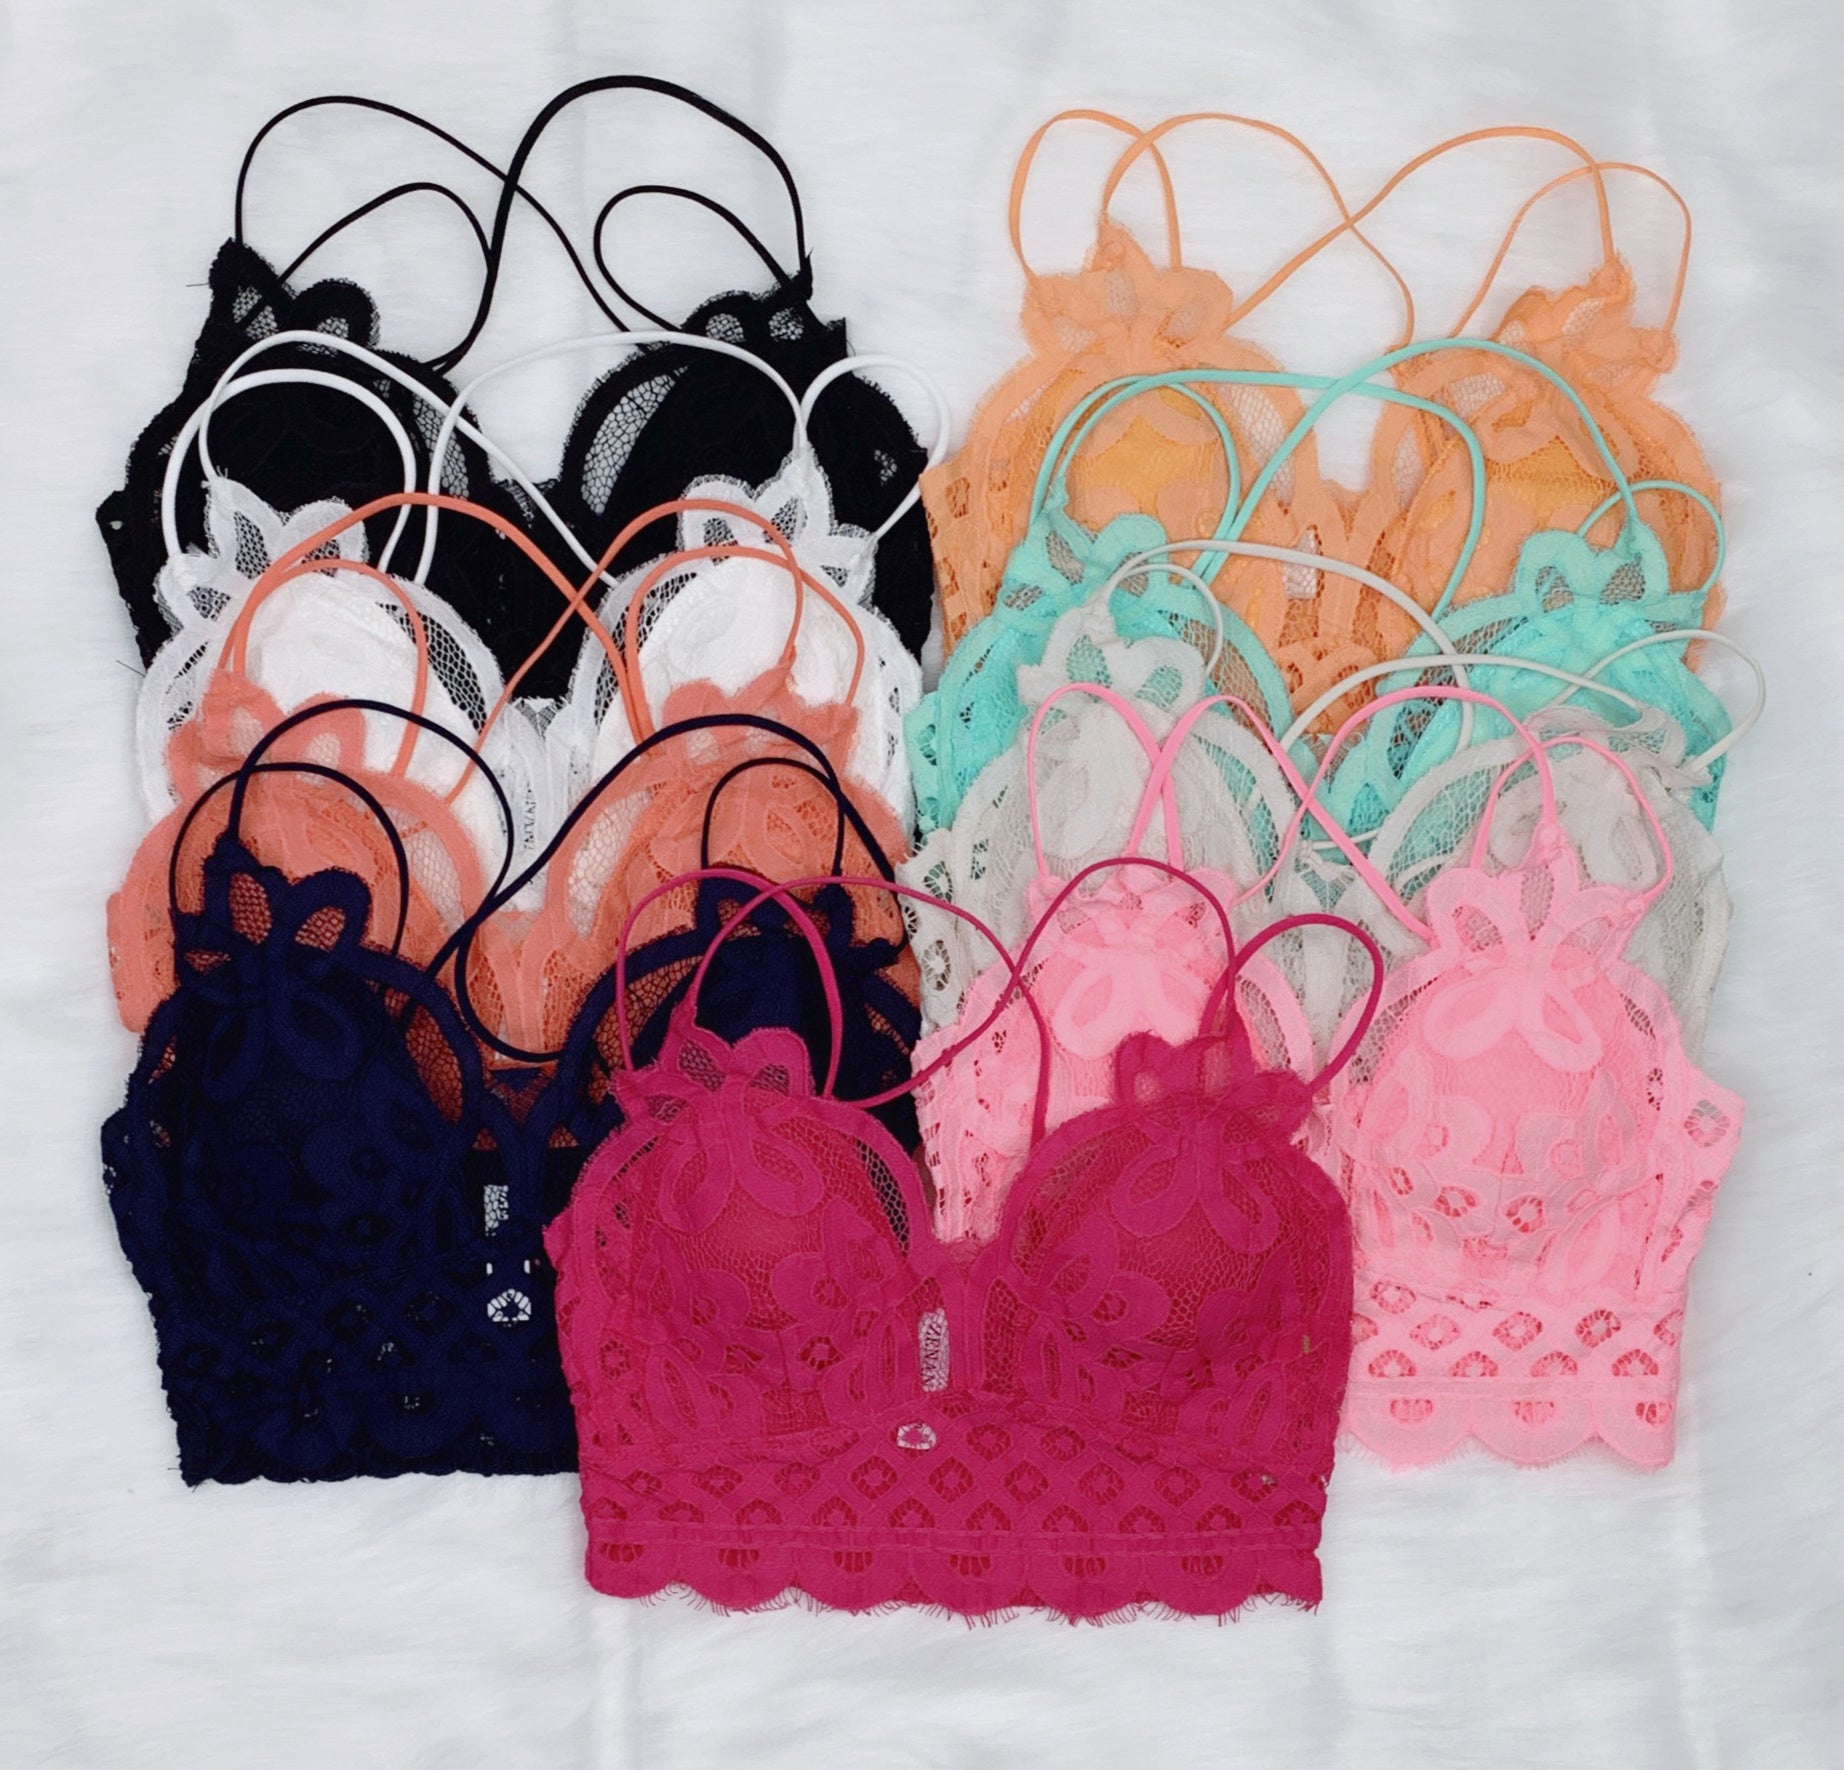 Buy Assorted Recycled Lace Bralette 2 Pack - 8, Bras